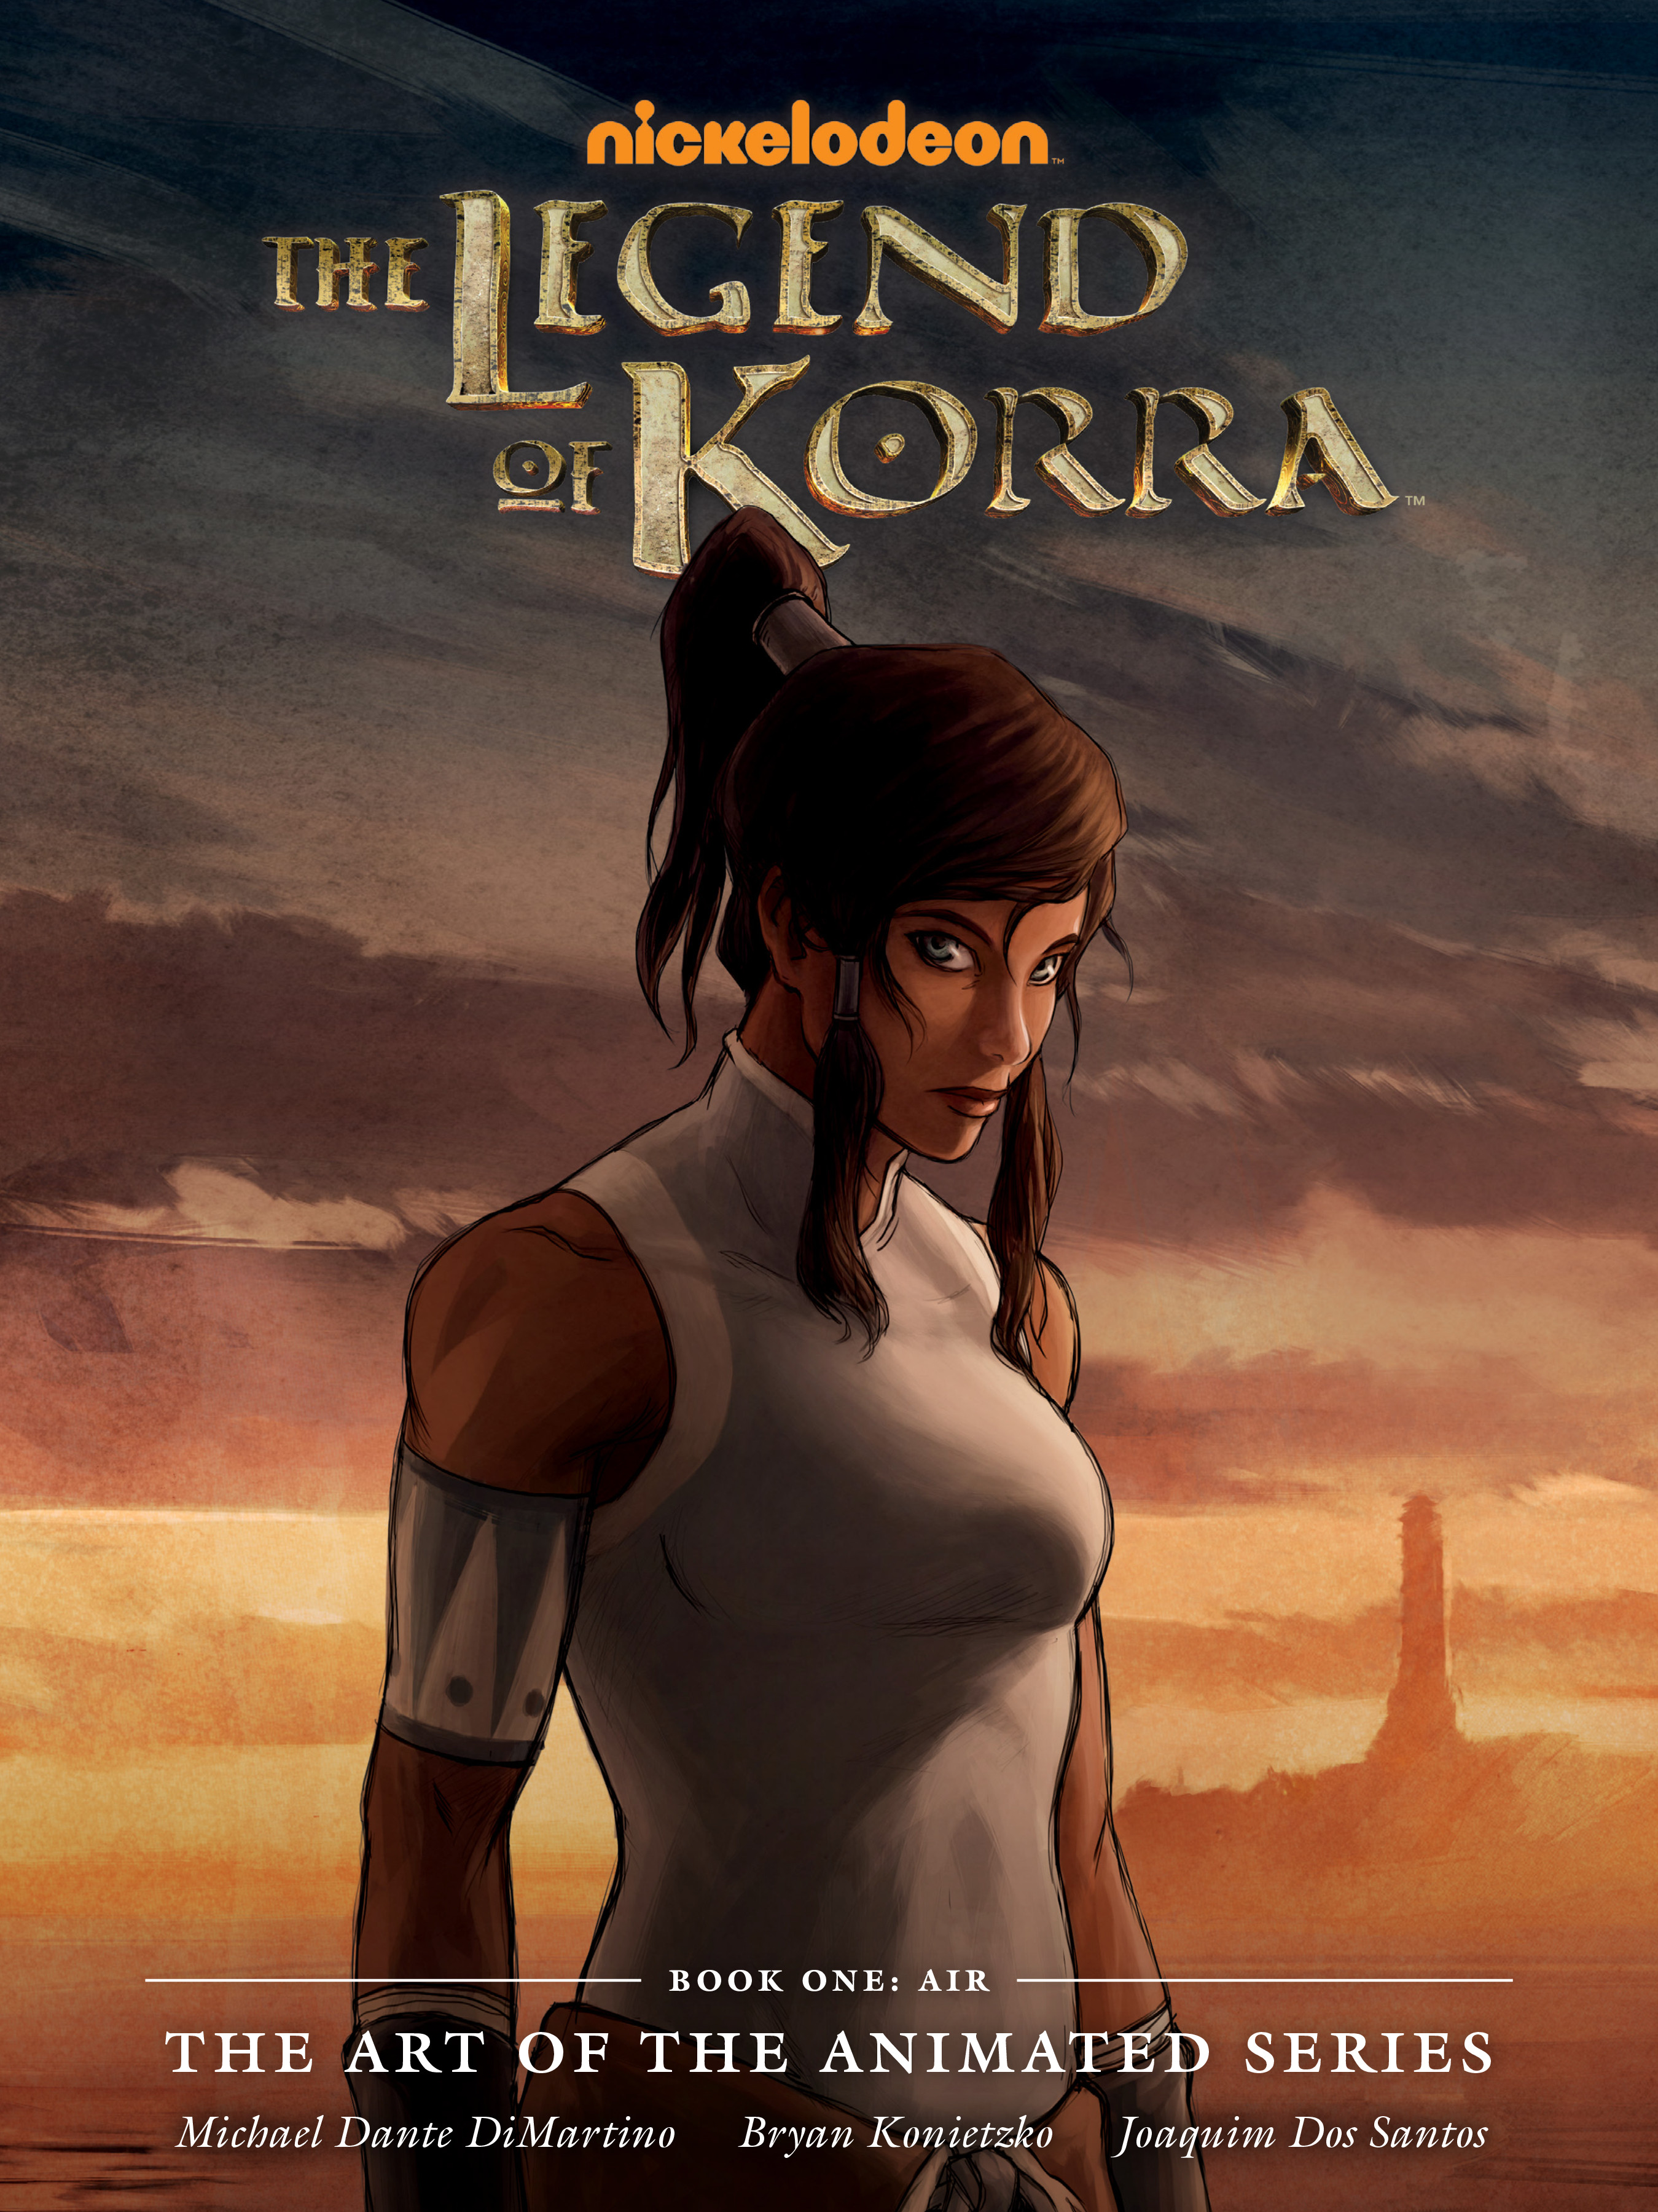 Read online The Legend of Korra: The Art of the Animated Series comic -  Issue # TPB 1 - 1